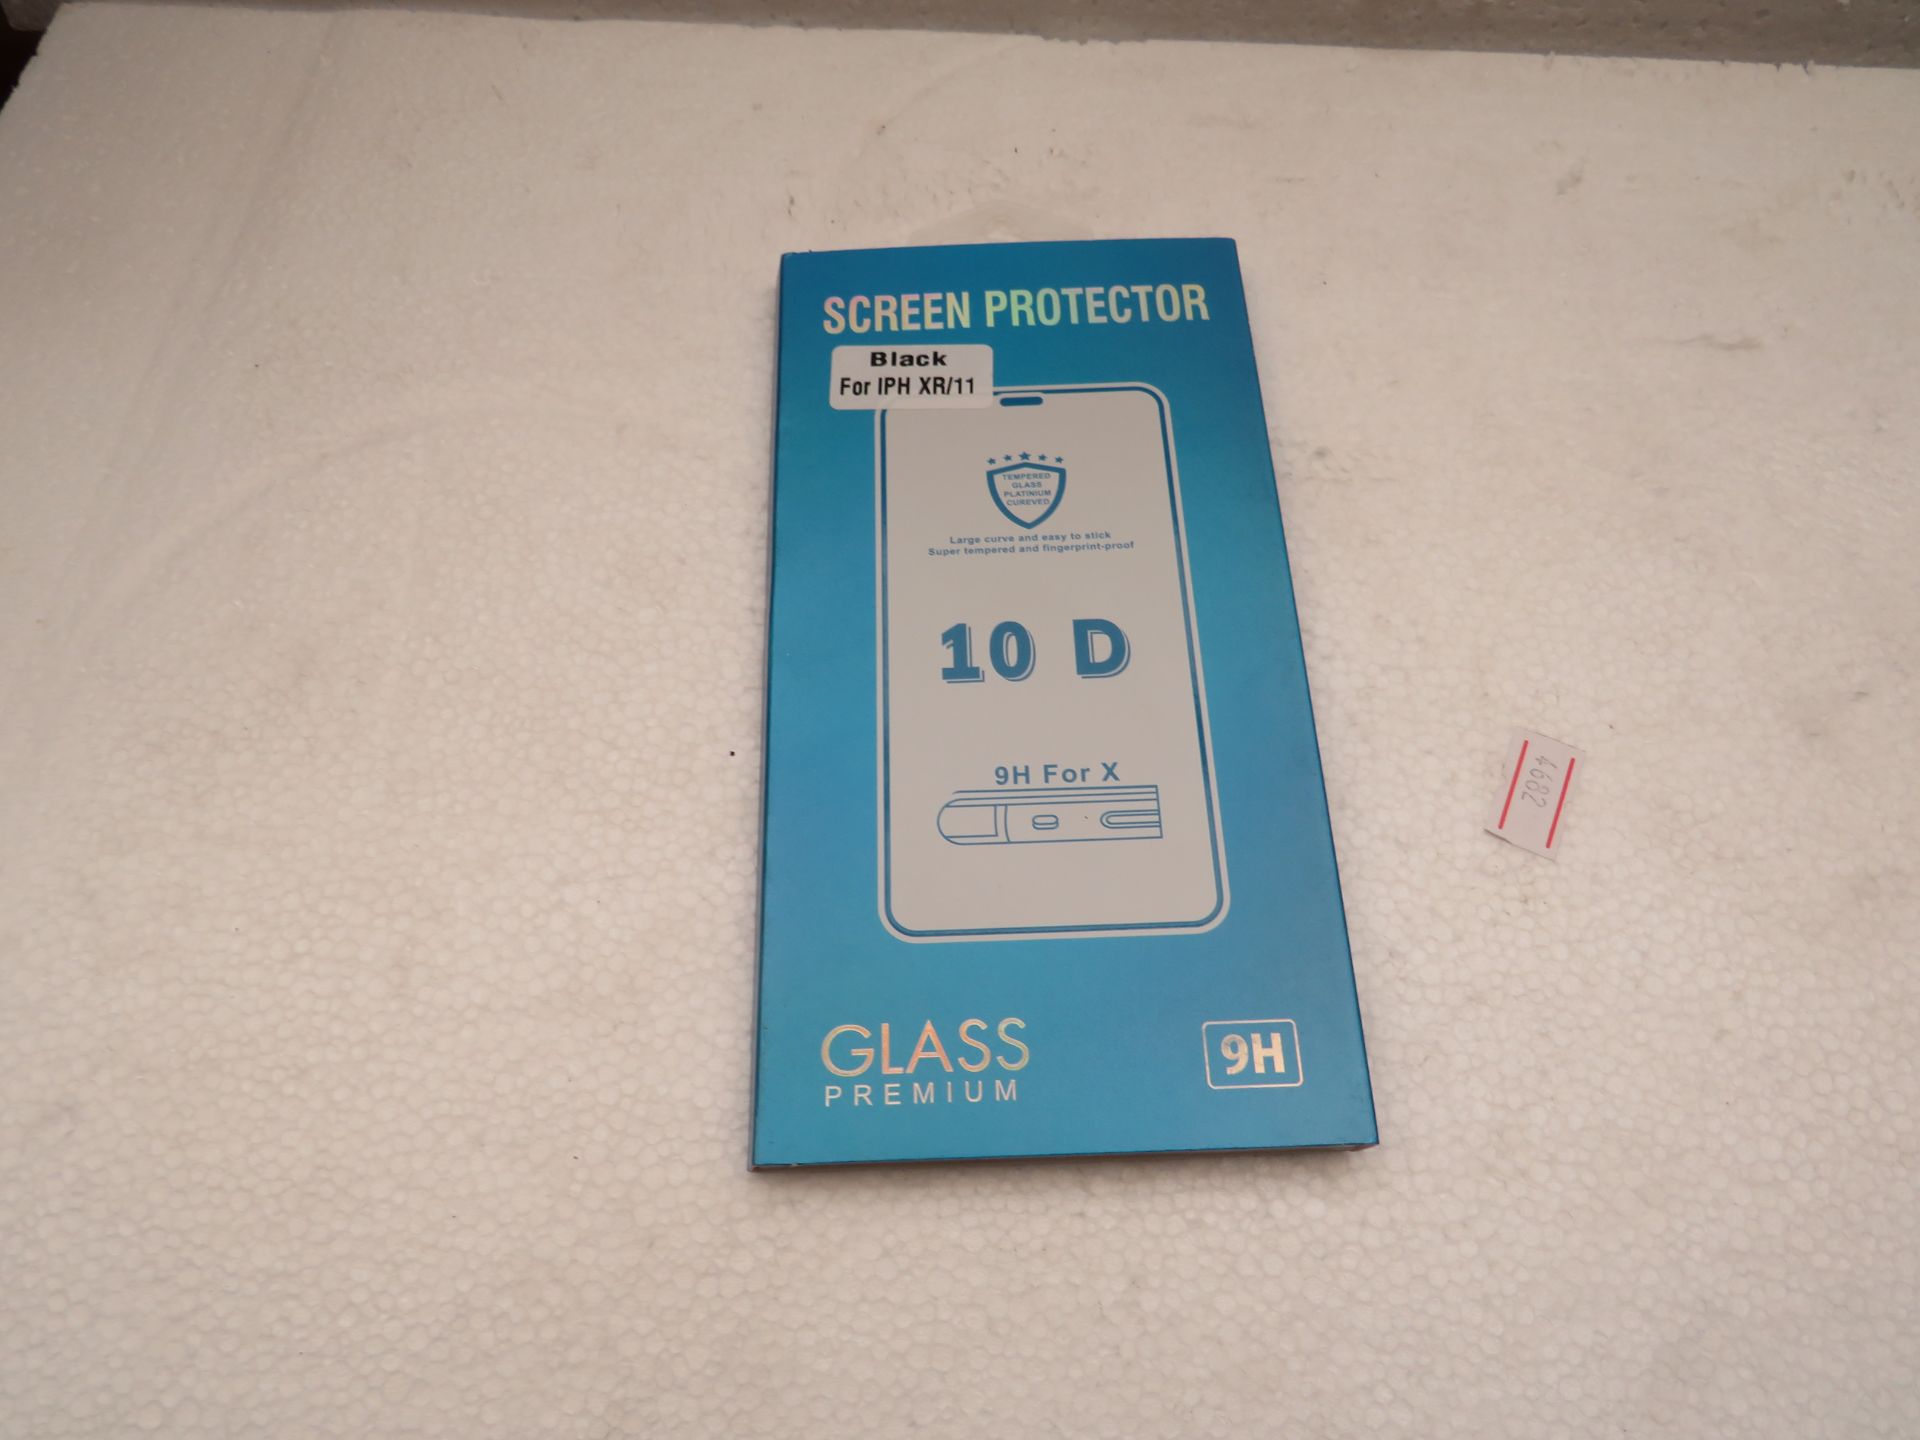 5x iPhone XR screen protectors, new and packaged.